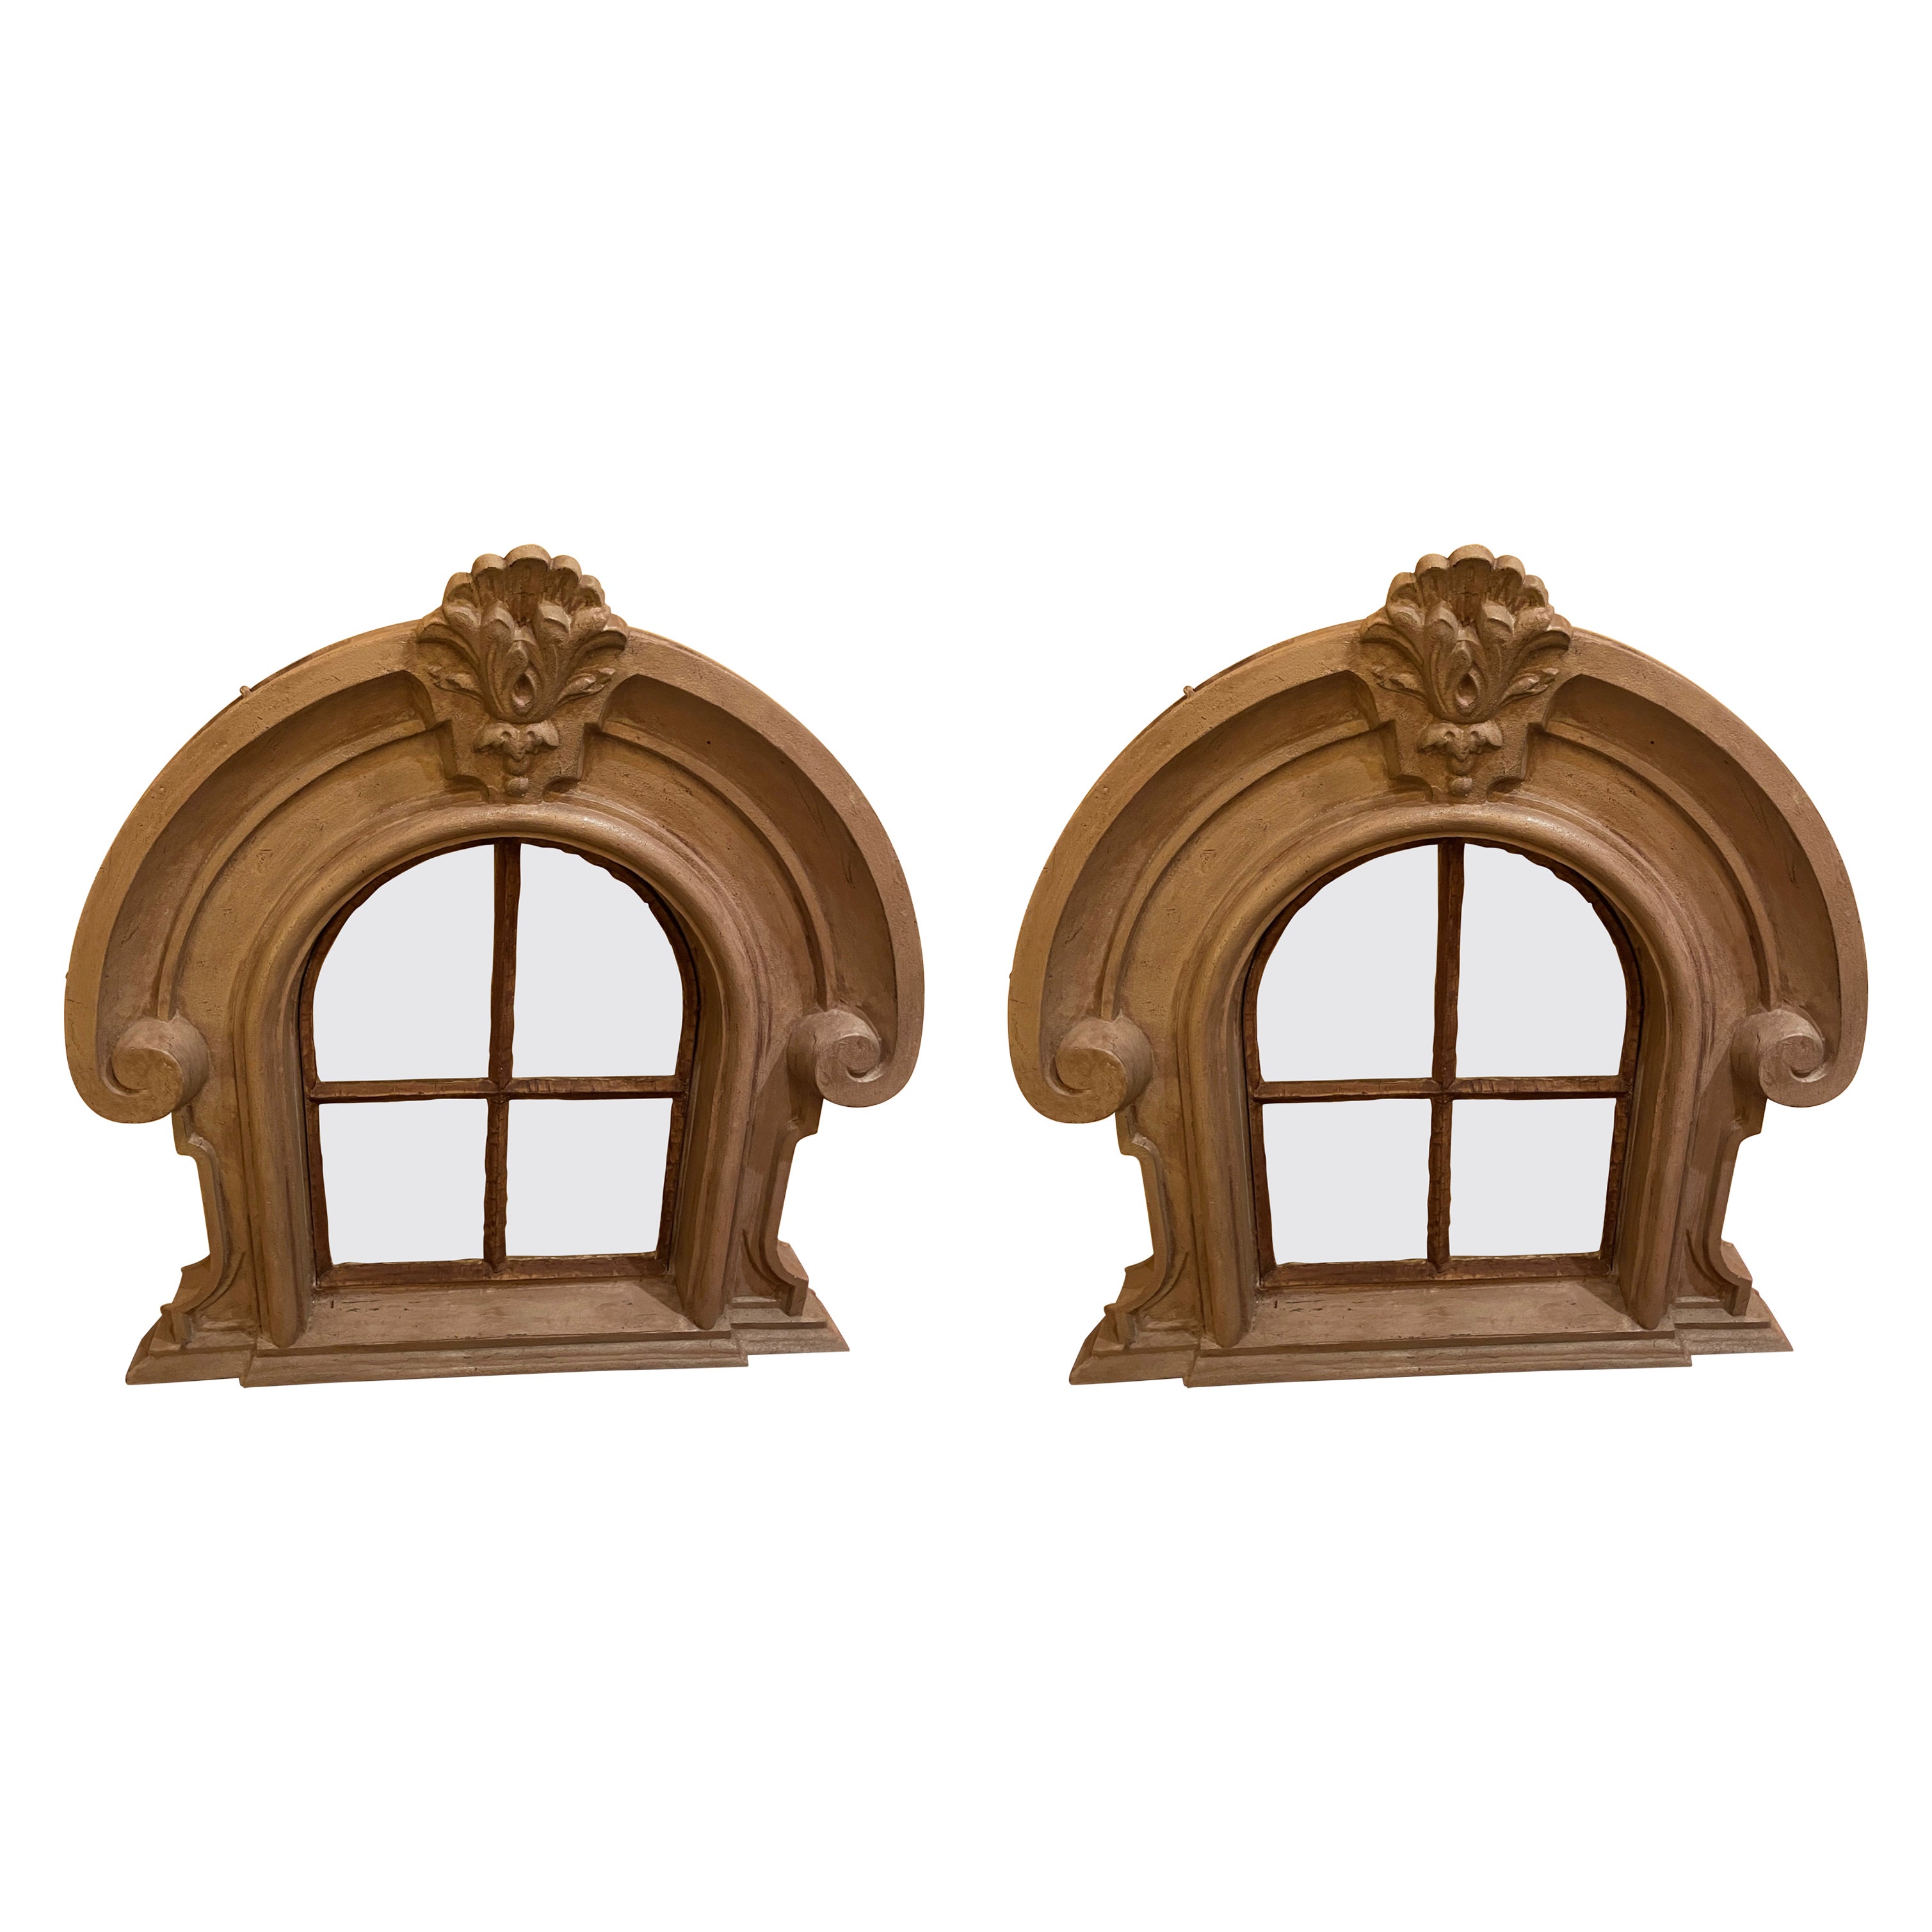 Two Dormer Windows in Cast Iron from the 19th Century